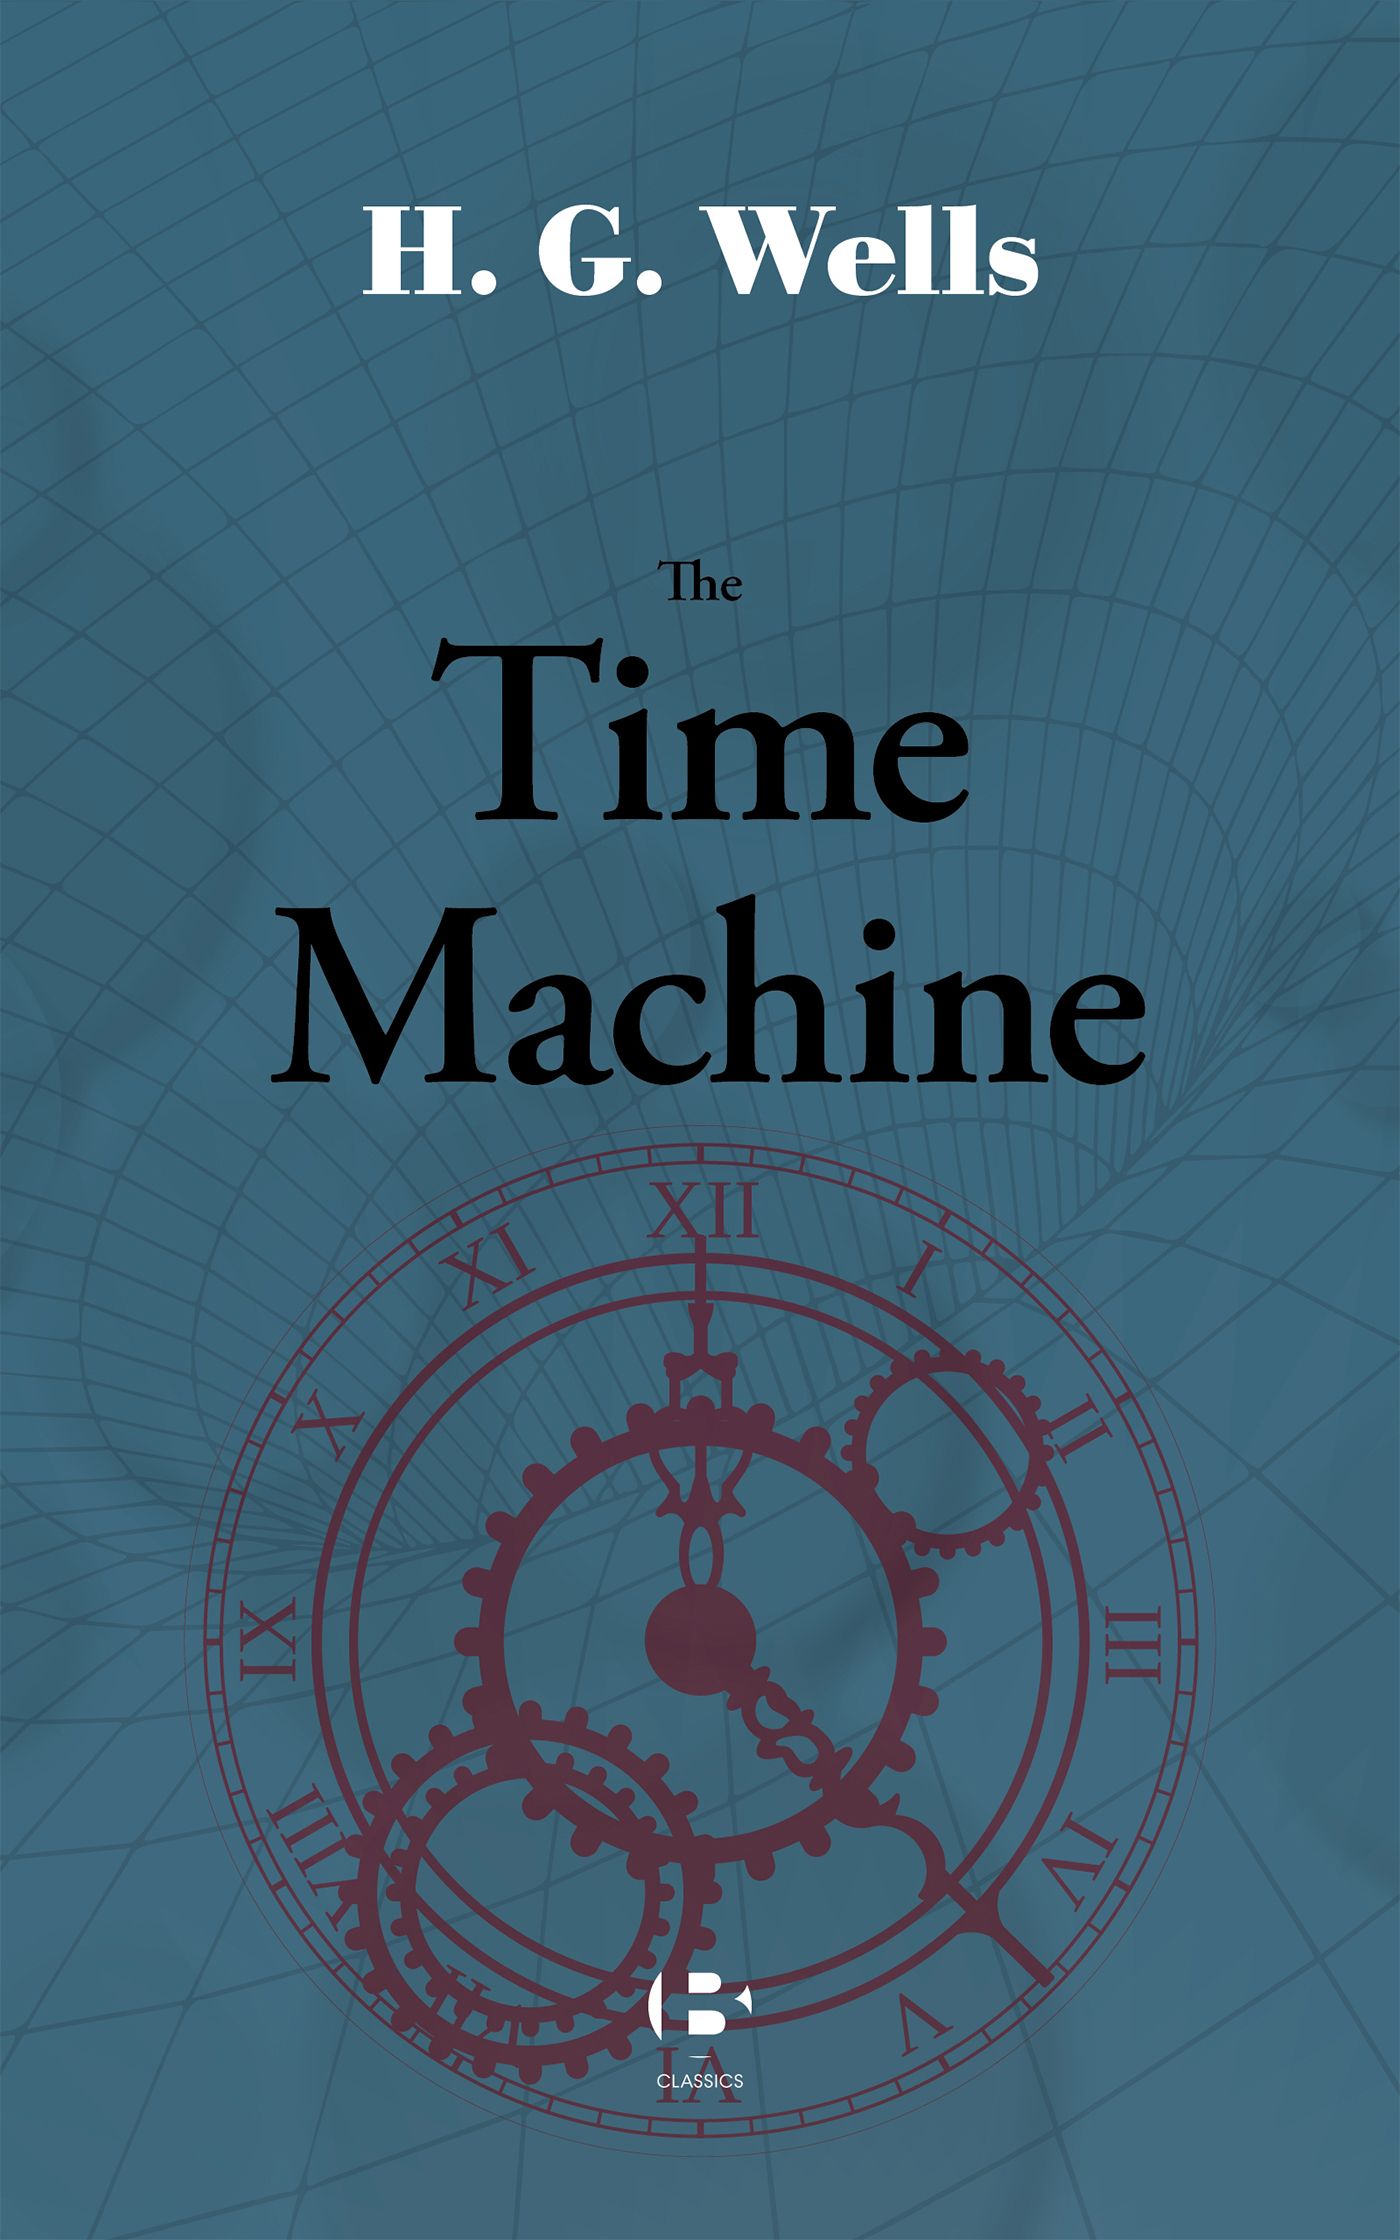 The Time Machine, eBook by H. G. Wells